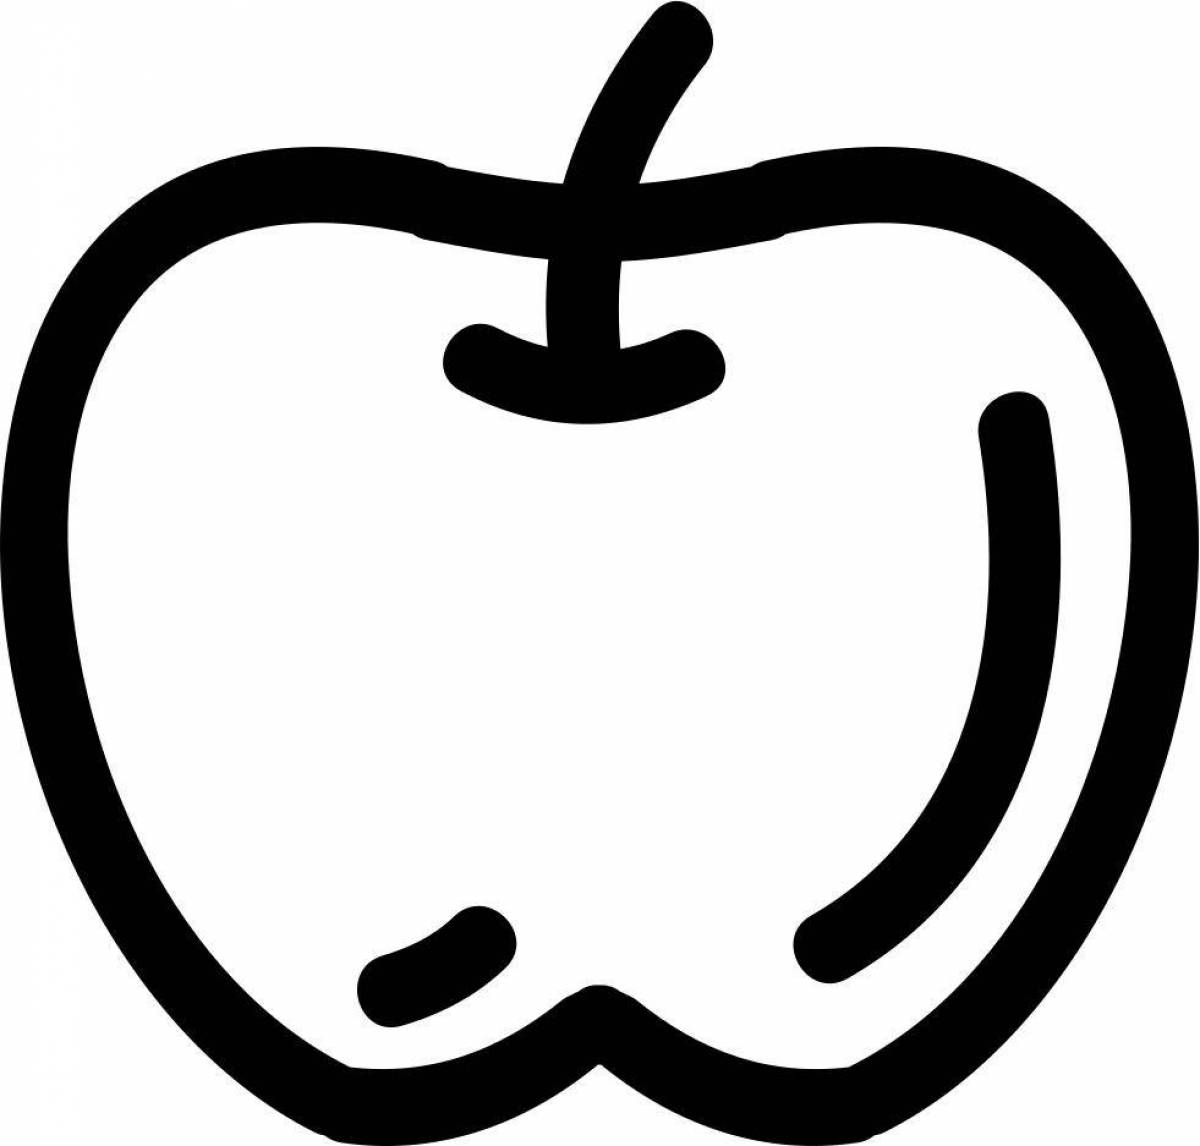 Coloring page of happy apple icon